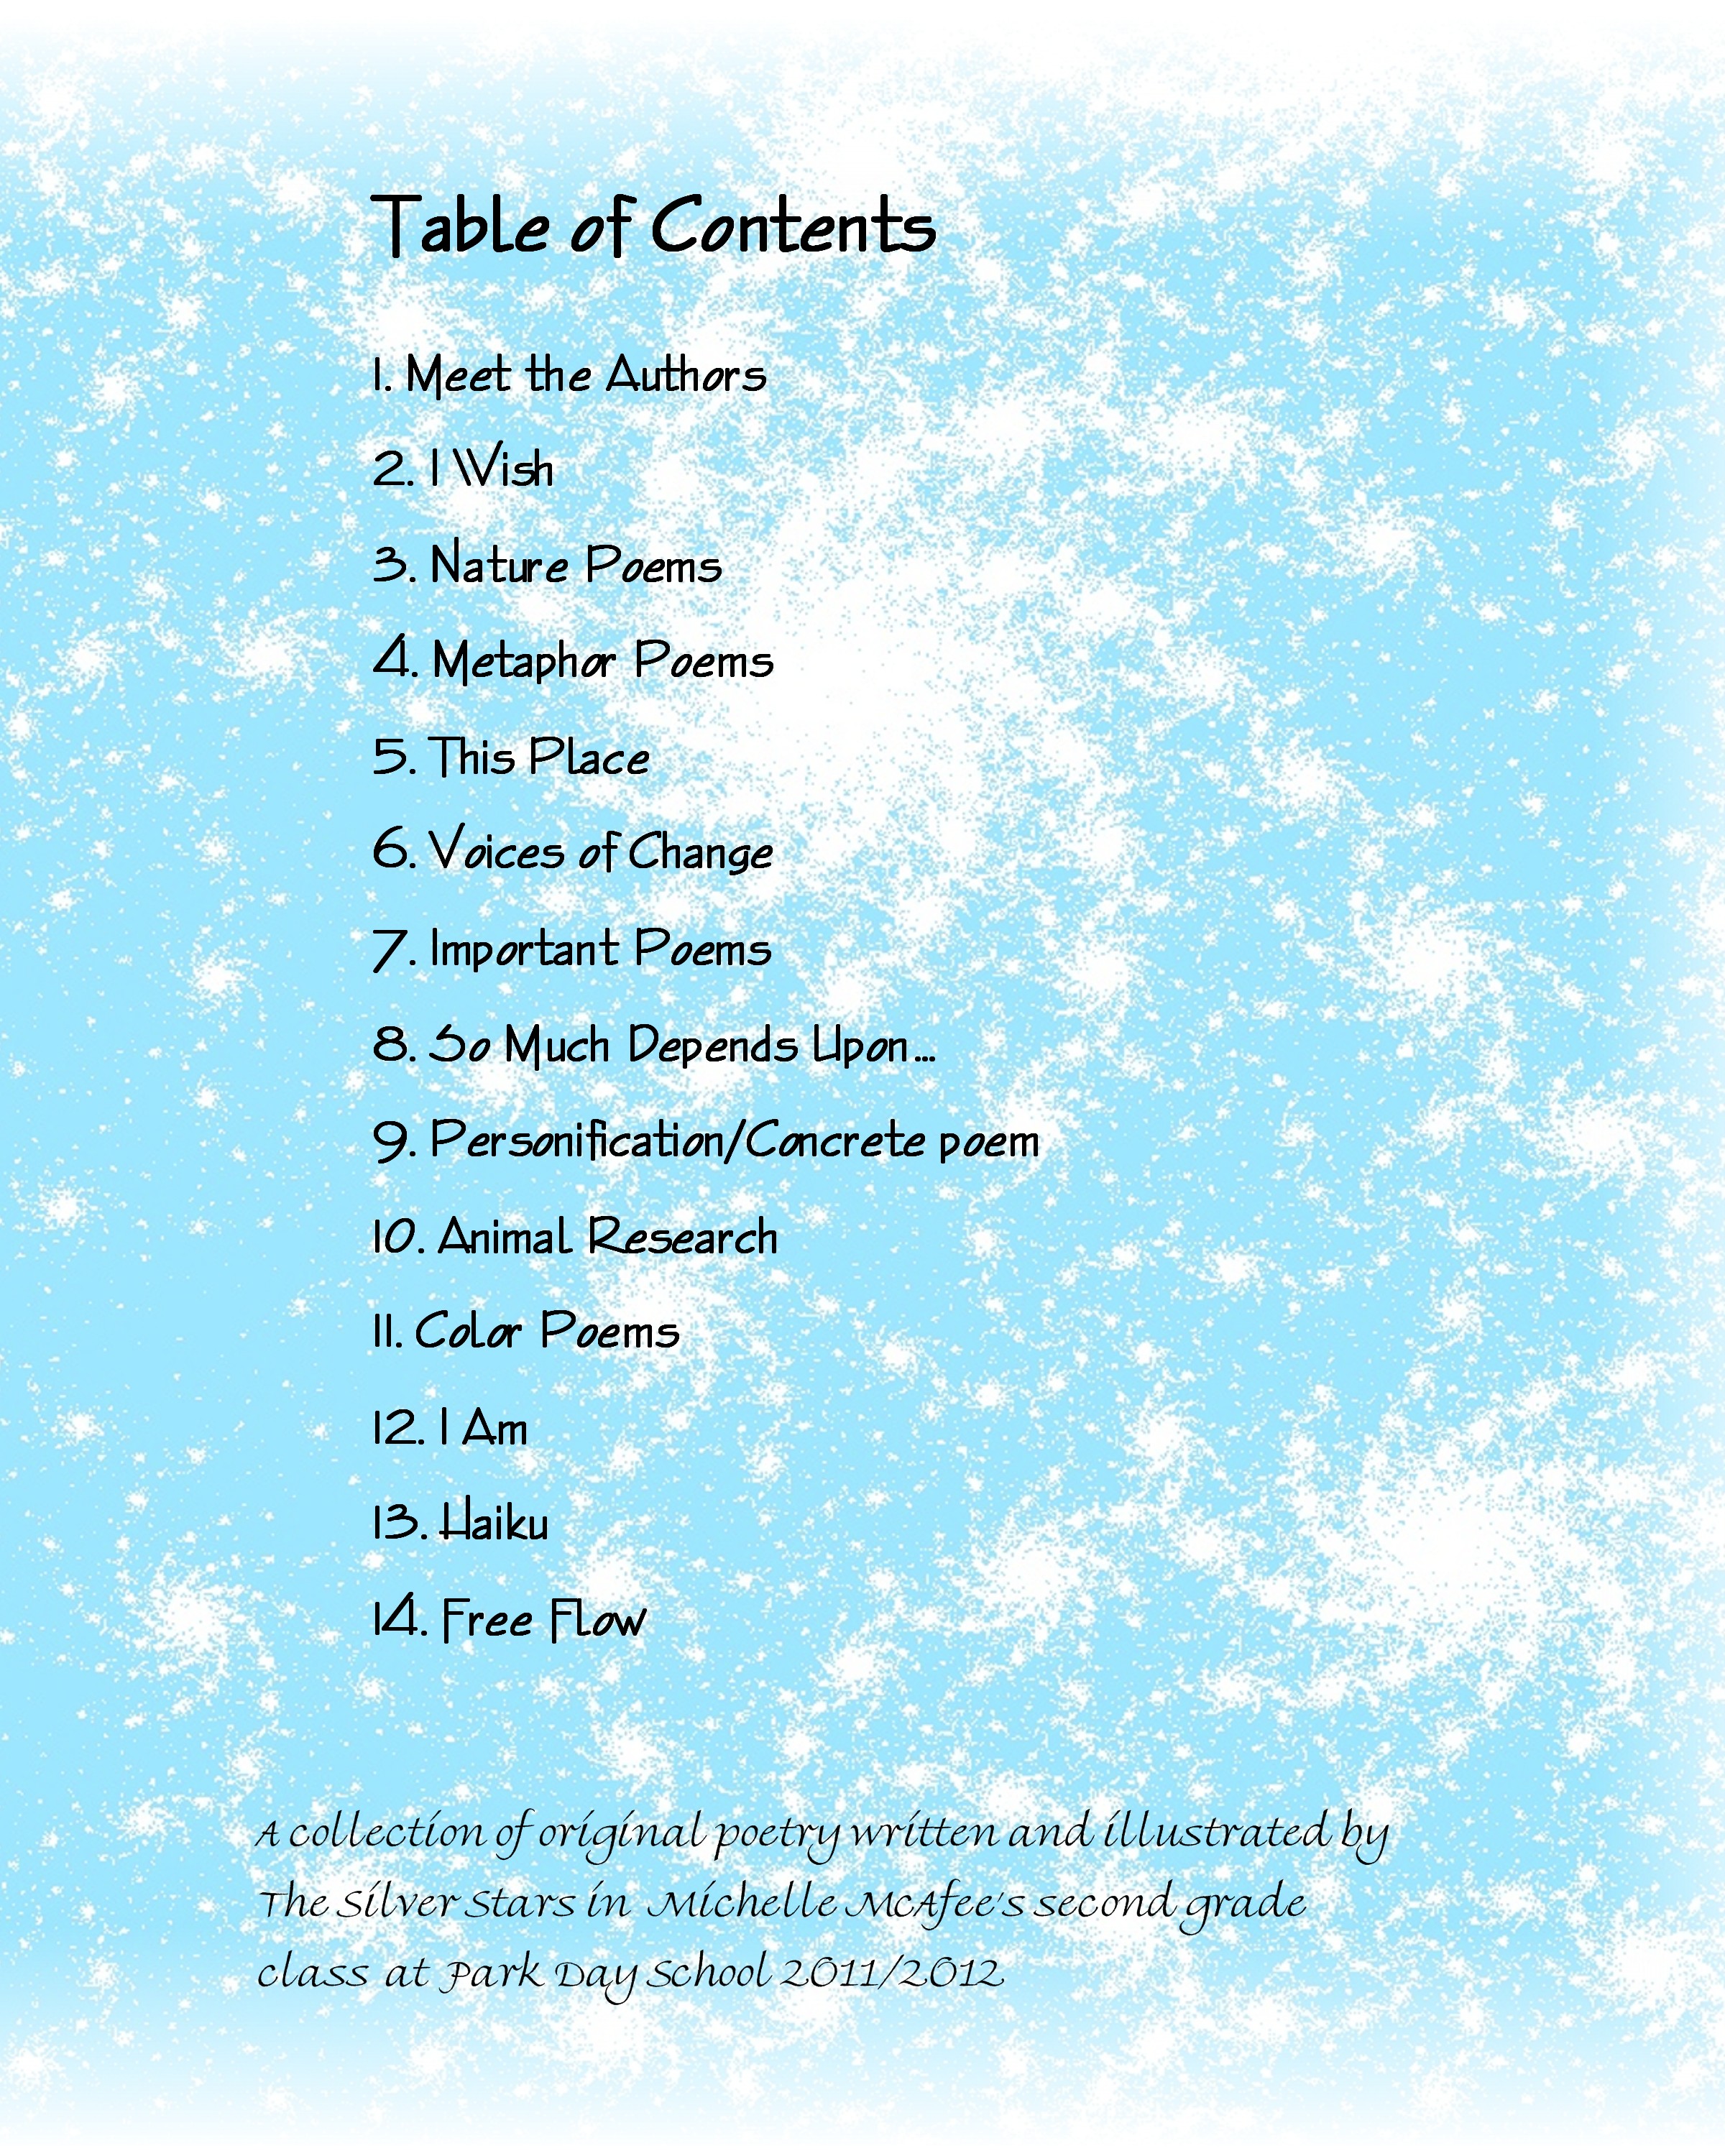 Poetry Anthonlogy Table of Contents